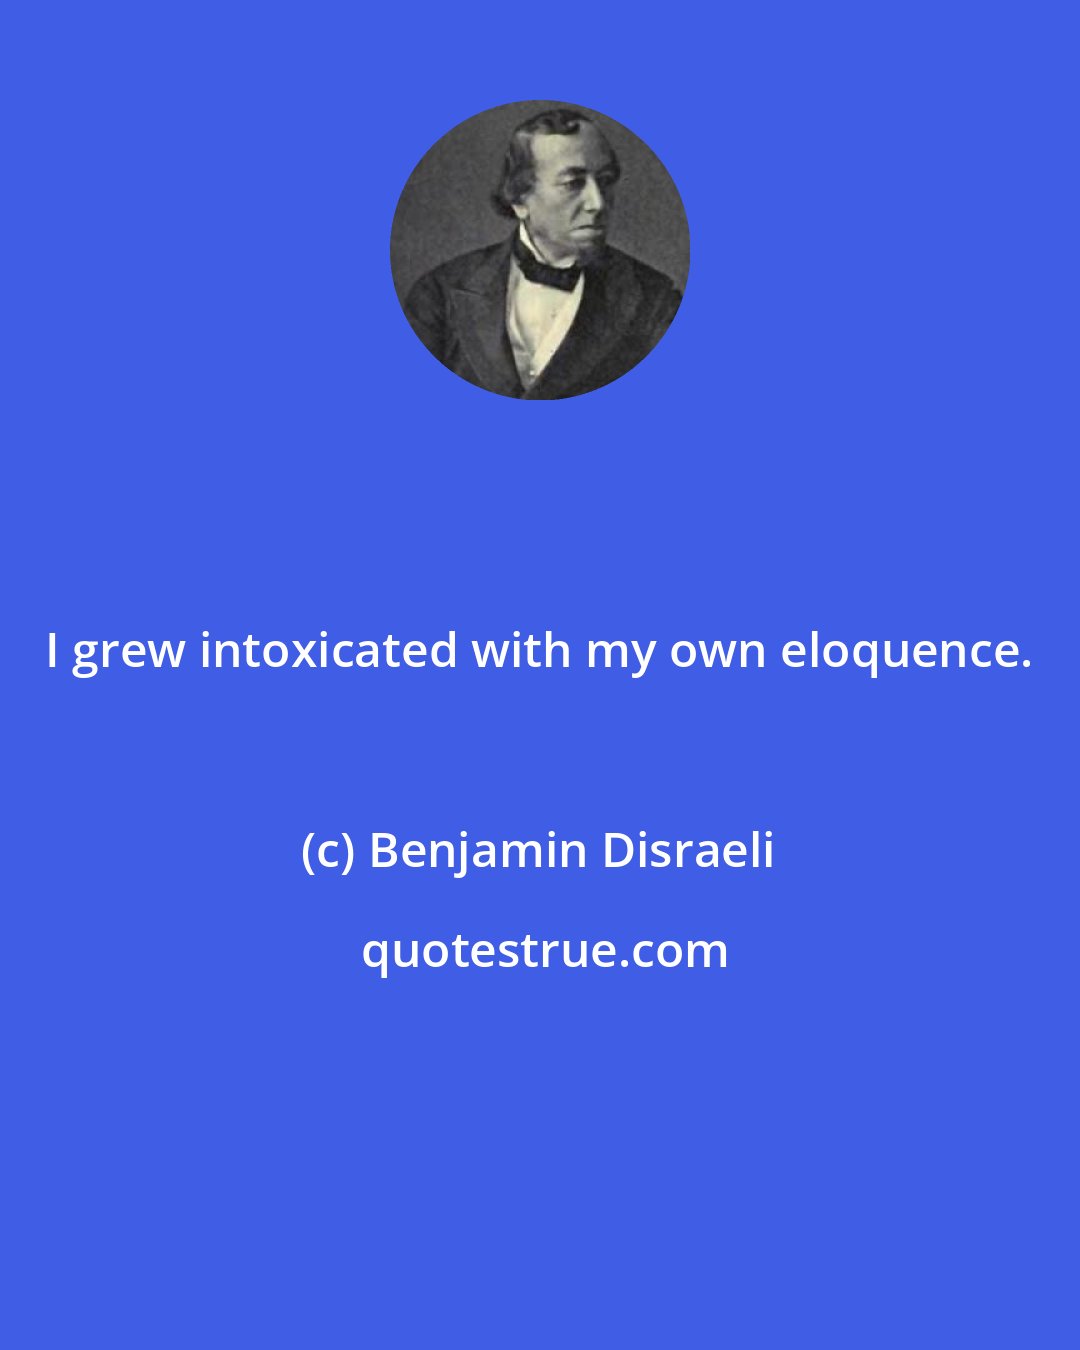 Benjamin Disraeli: I grew intoxicated with my own eloquence.